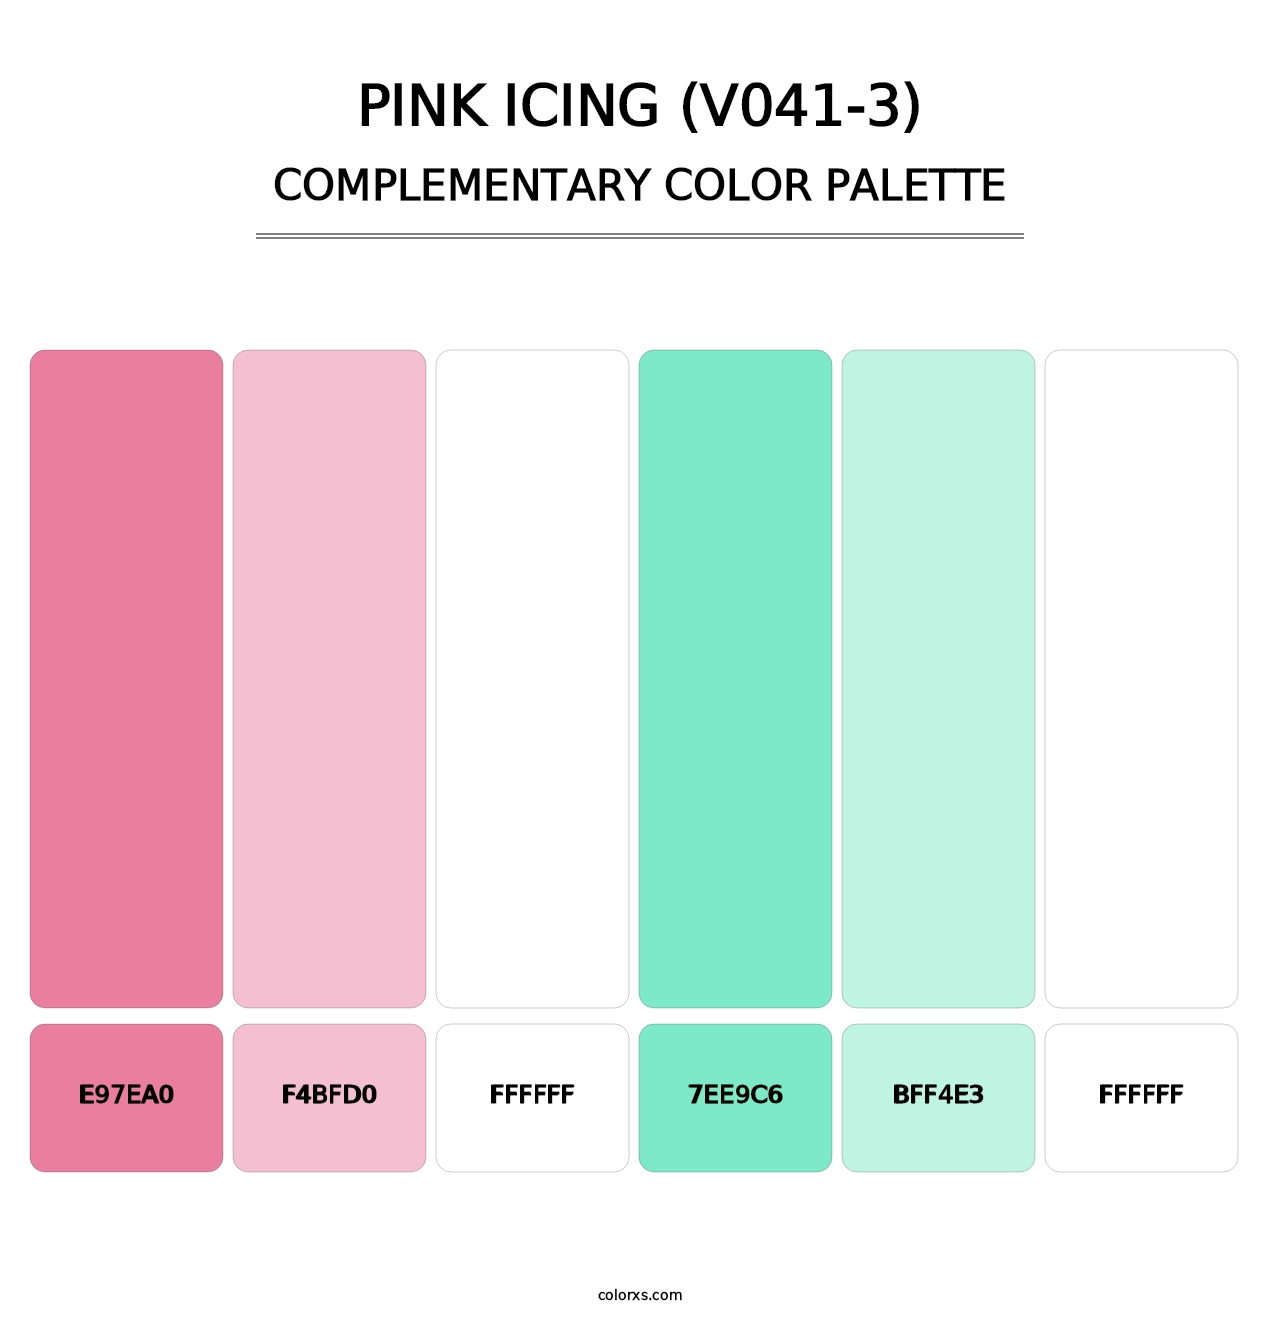 Pink Icing (V041-3) - Complementary Color Palette